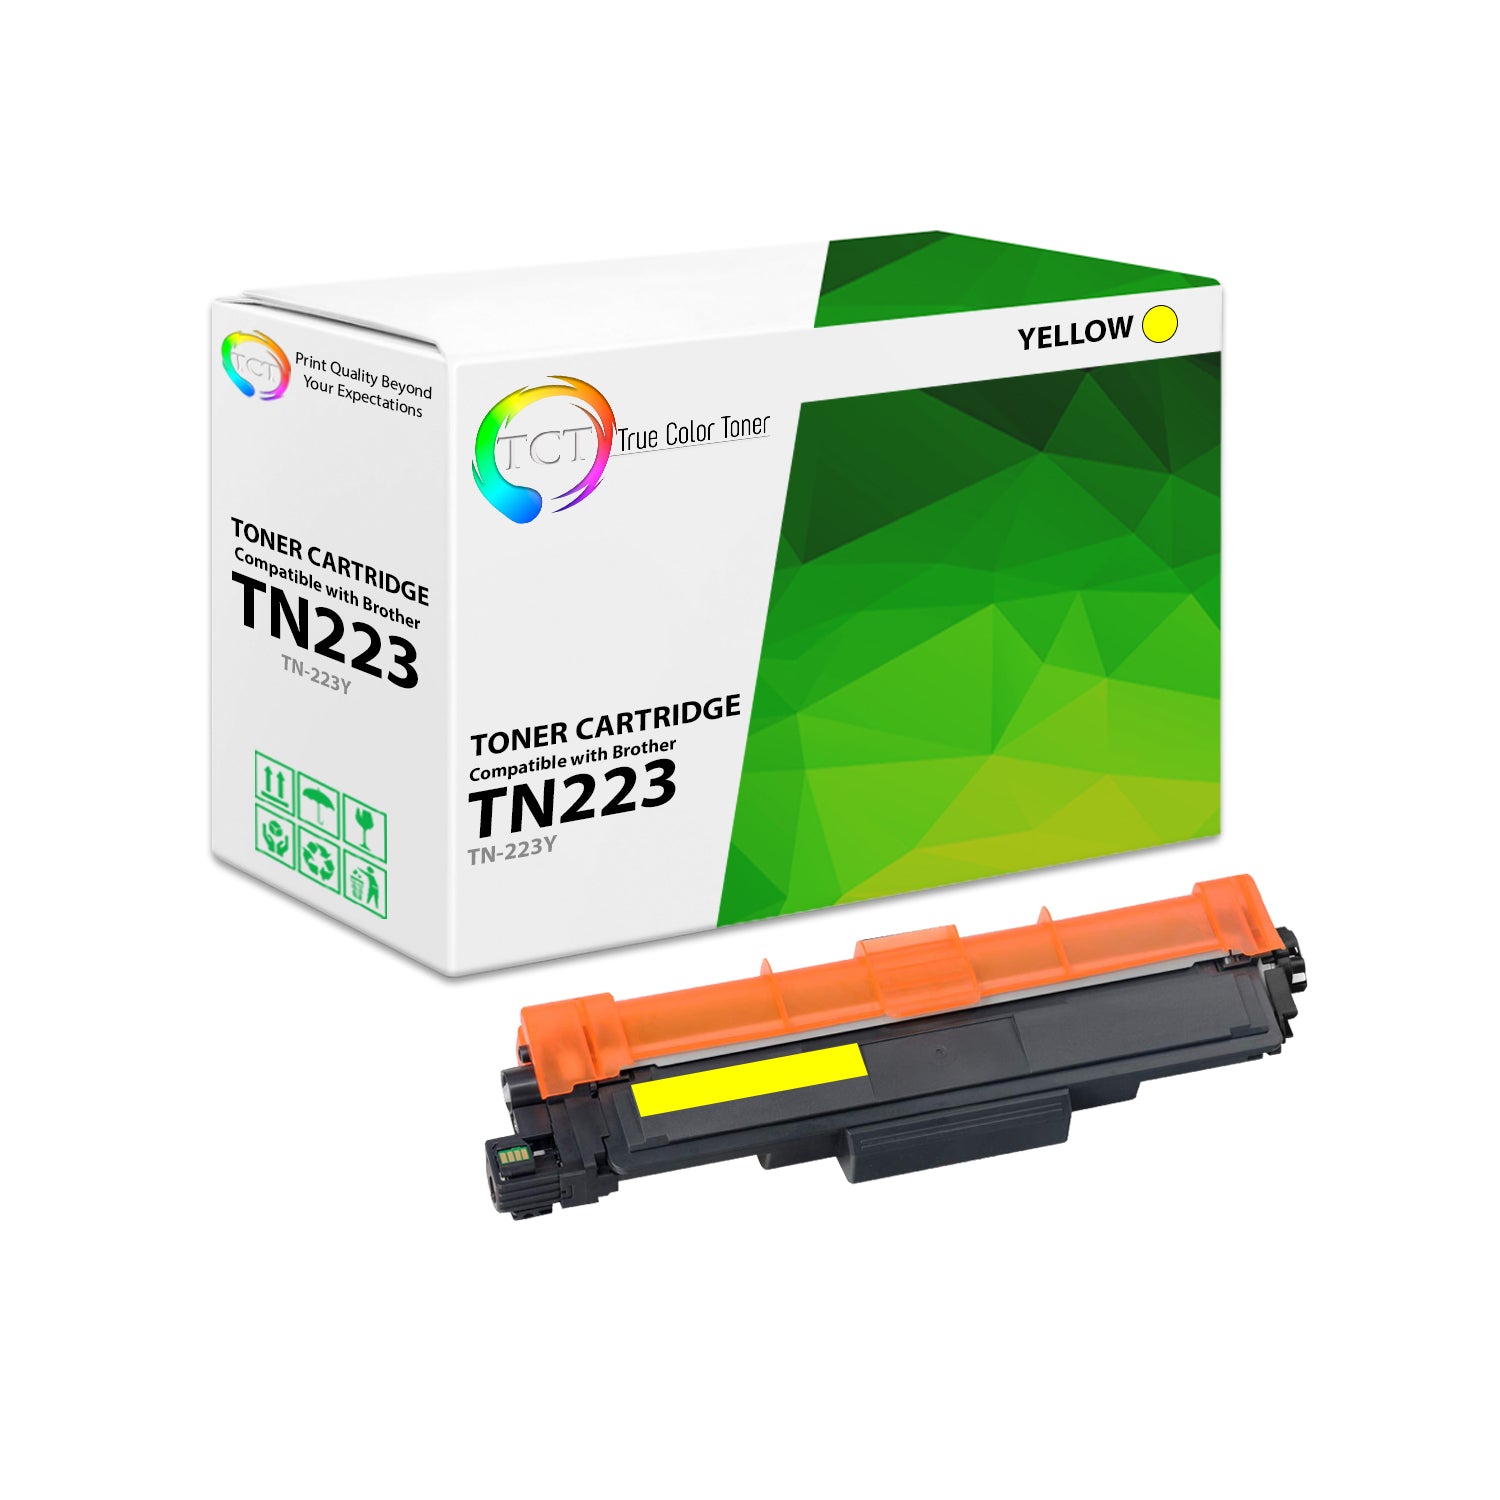 TCT Compatible Toner Cartridge Replacement for the Brother TN223 Series - 1 Pack Yellow